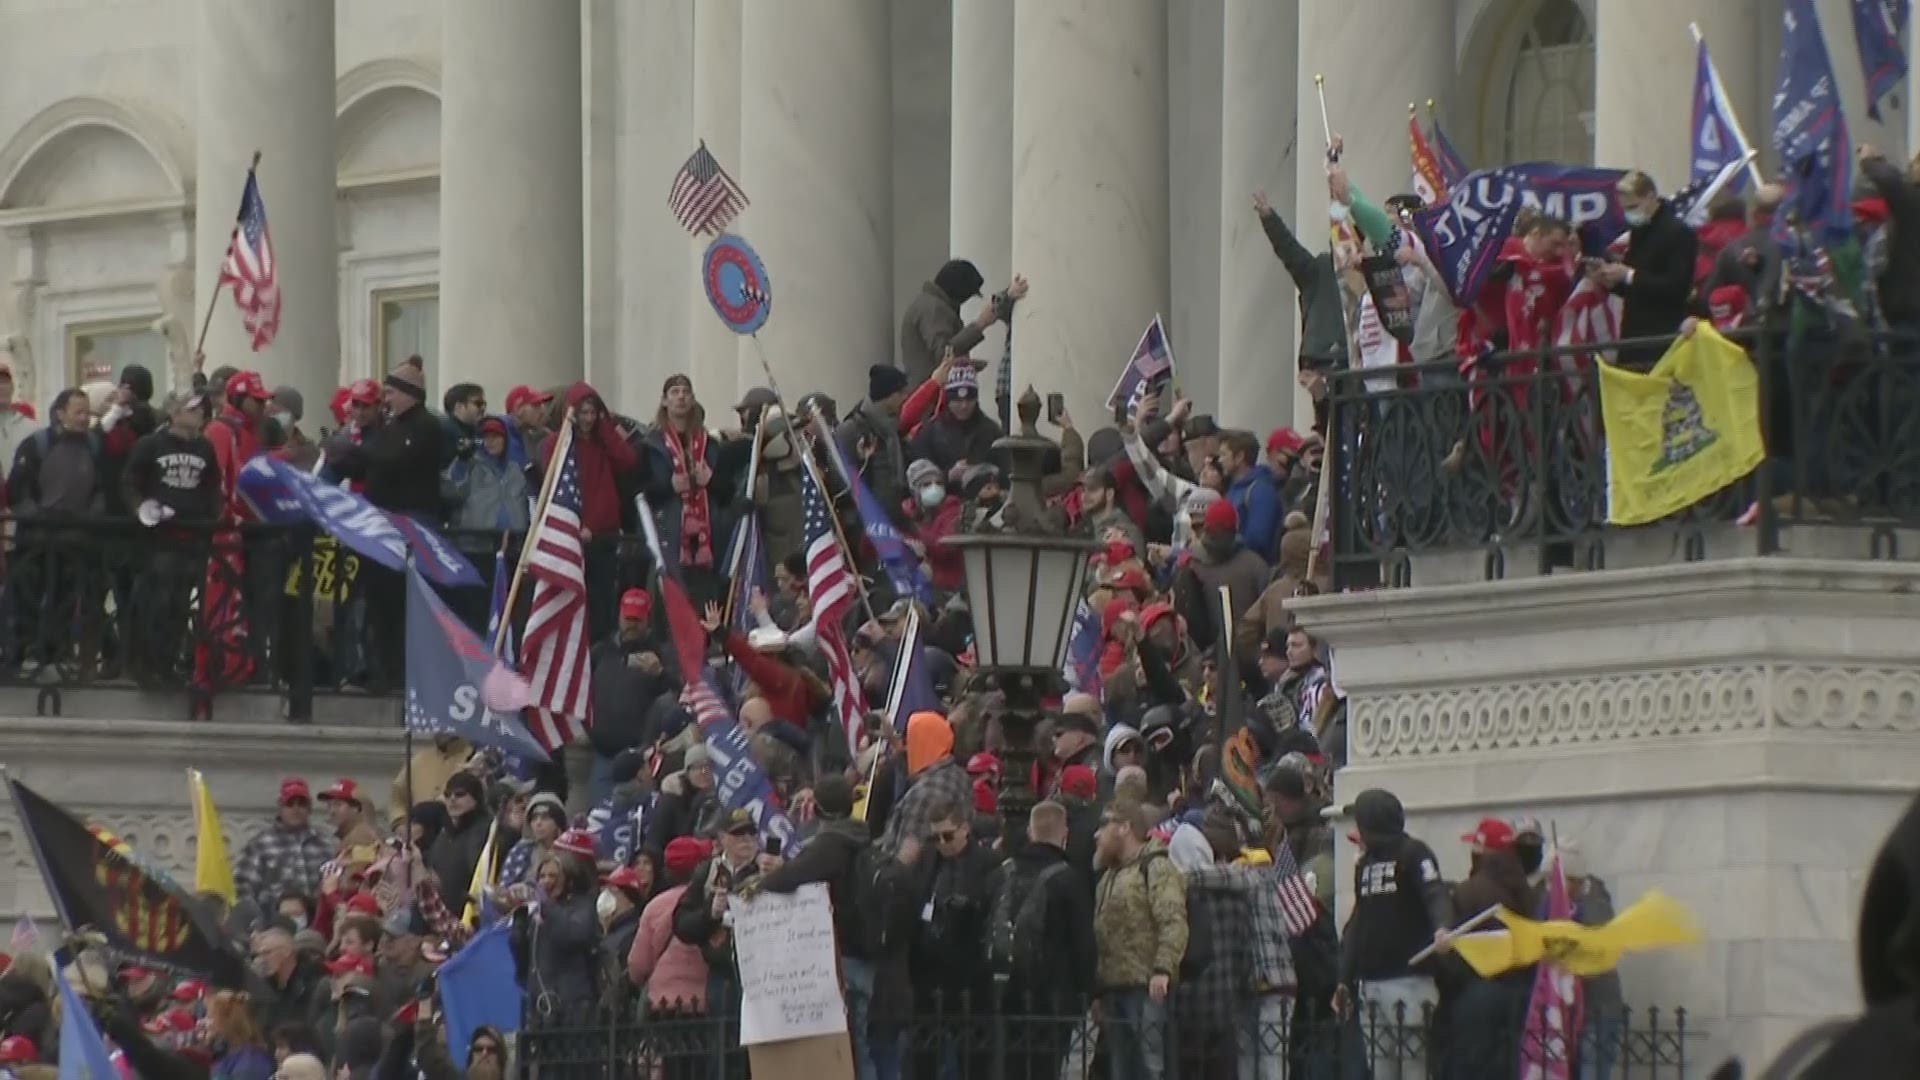 Angry supporters of President Donald Trump stormed the U.S. Capitol on Wednesday in a chaotic protest aimed at thwarting a peaceful transfer of power.